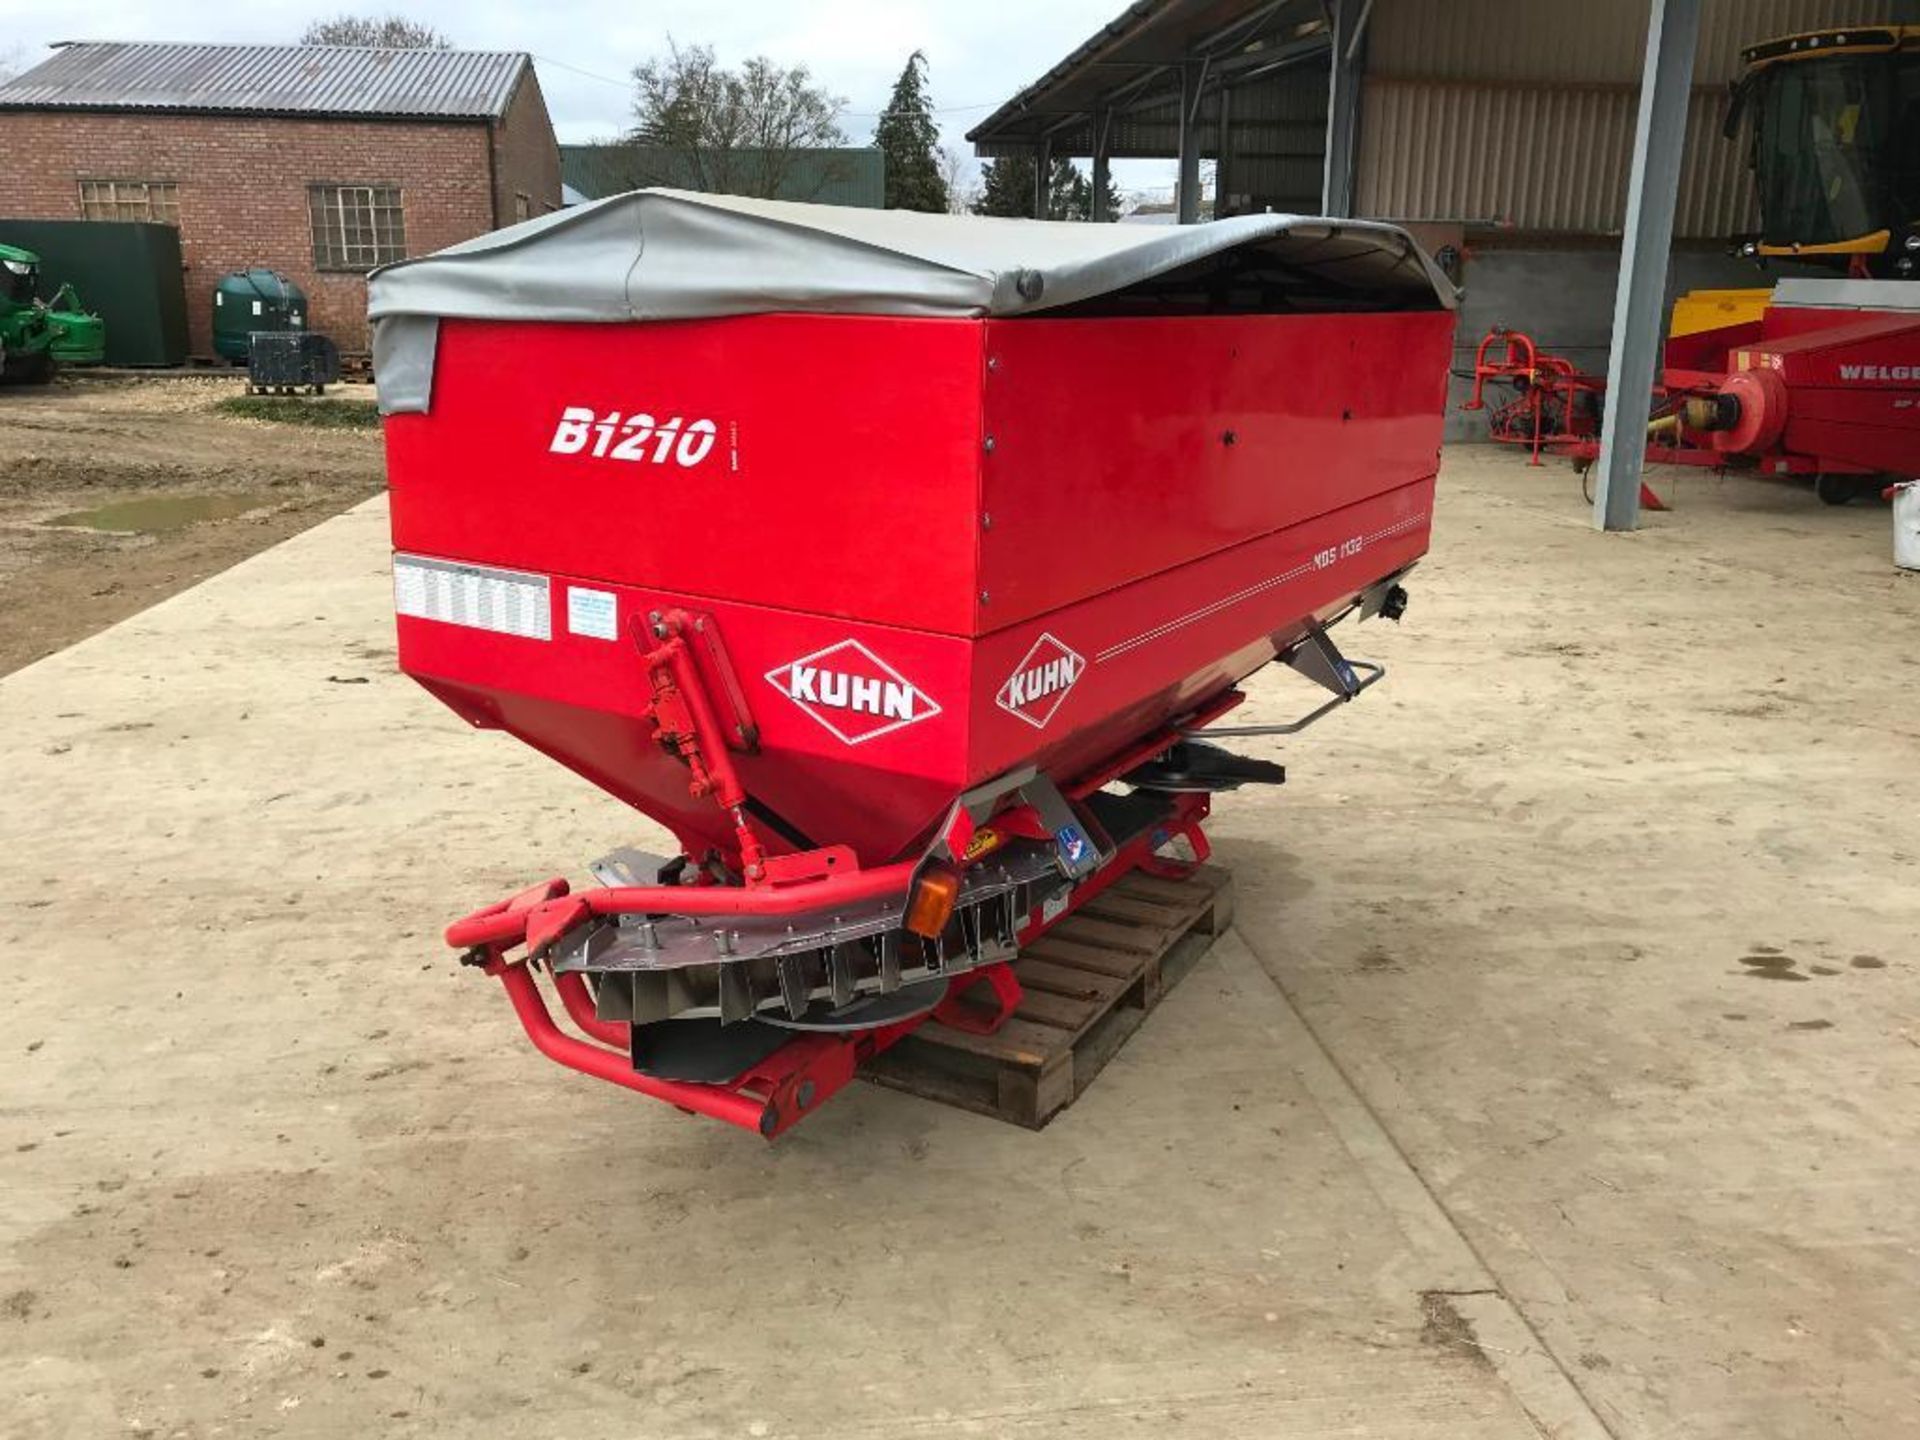 2005 Kuhn MDS1132 24m twin disc fertiliser spreader with border control, hydraulic shut off and B121 - Image 4 of 10